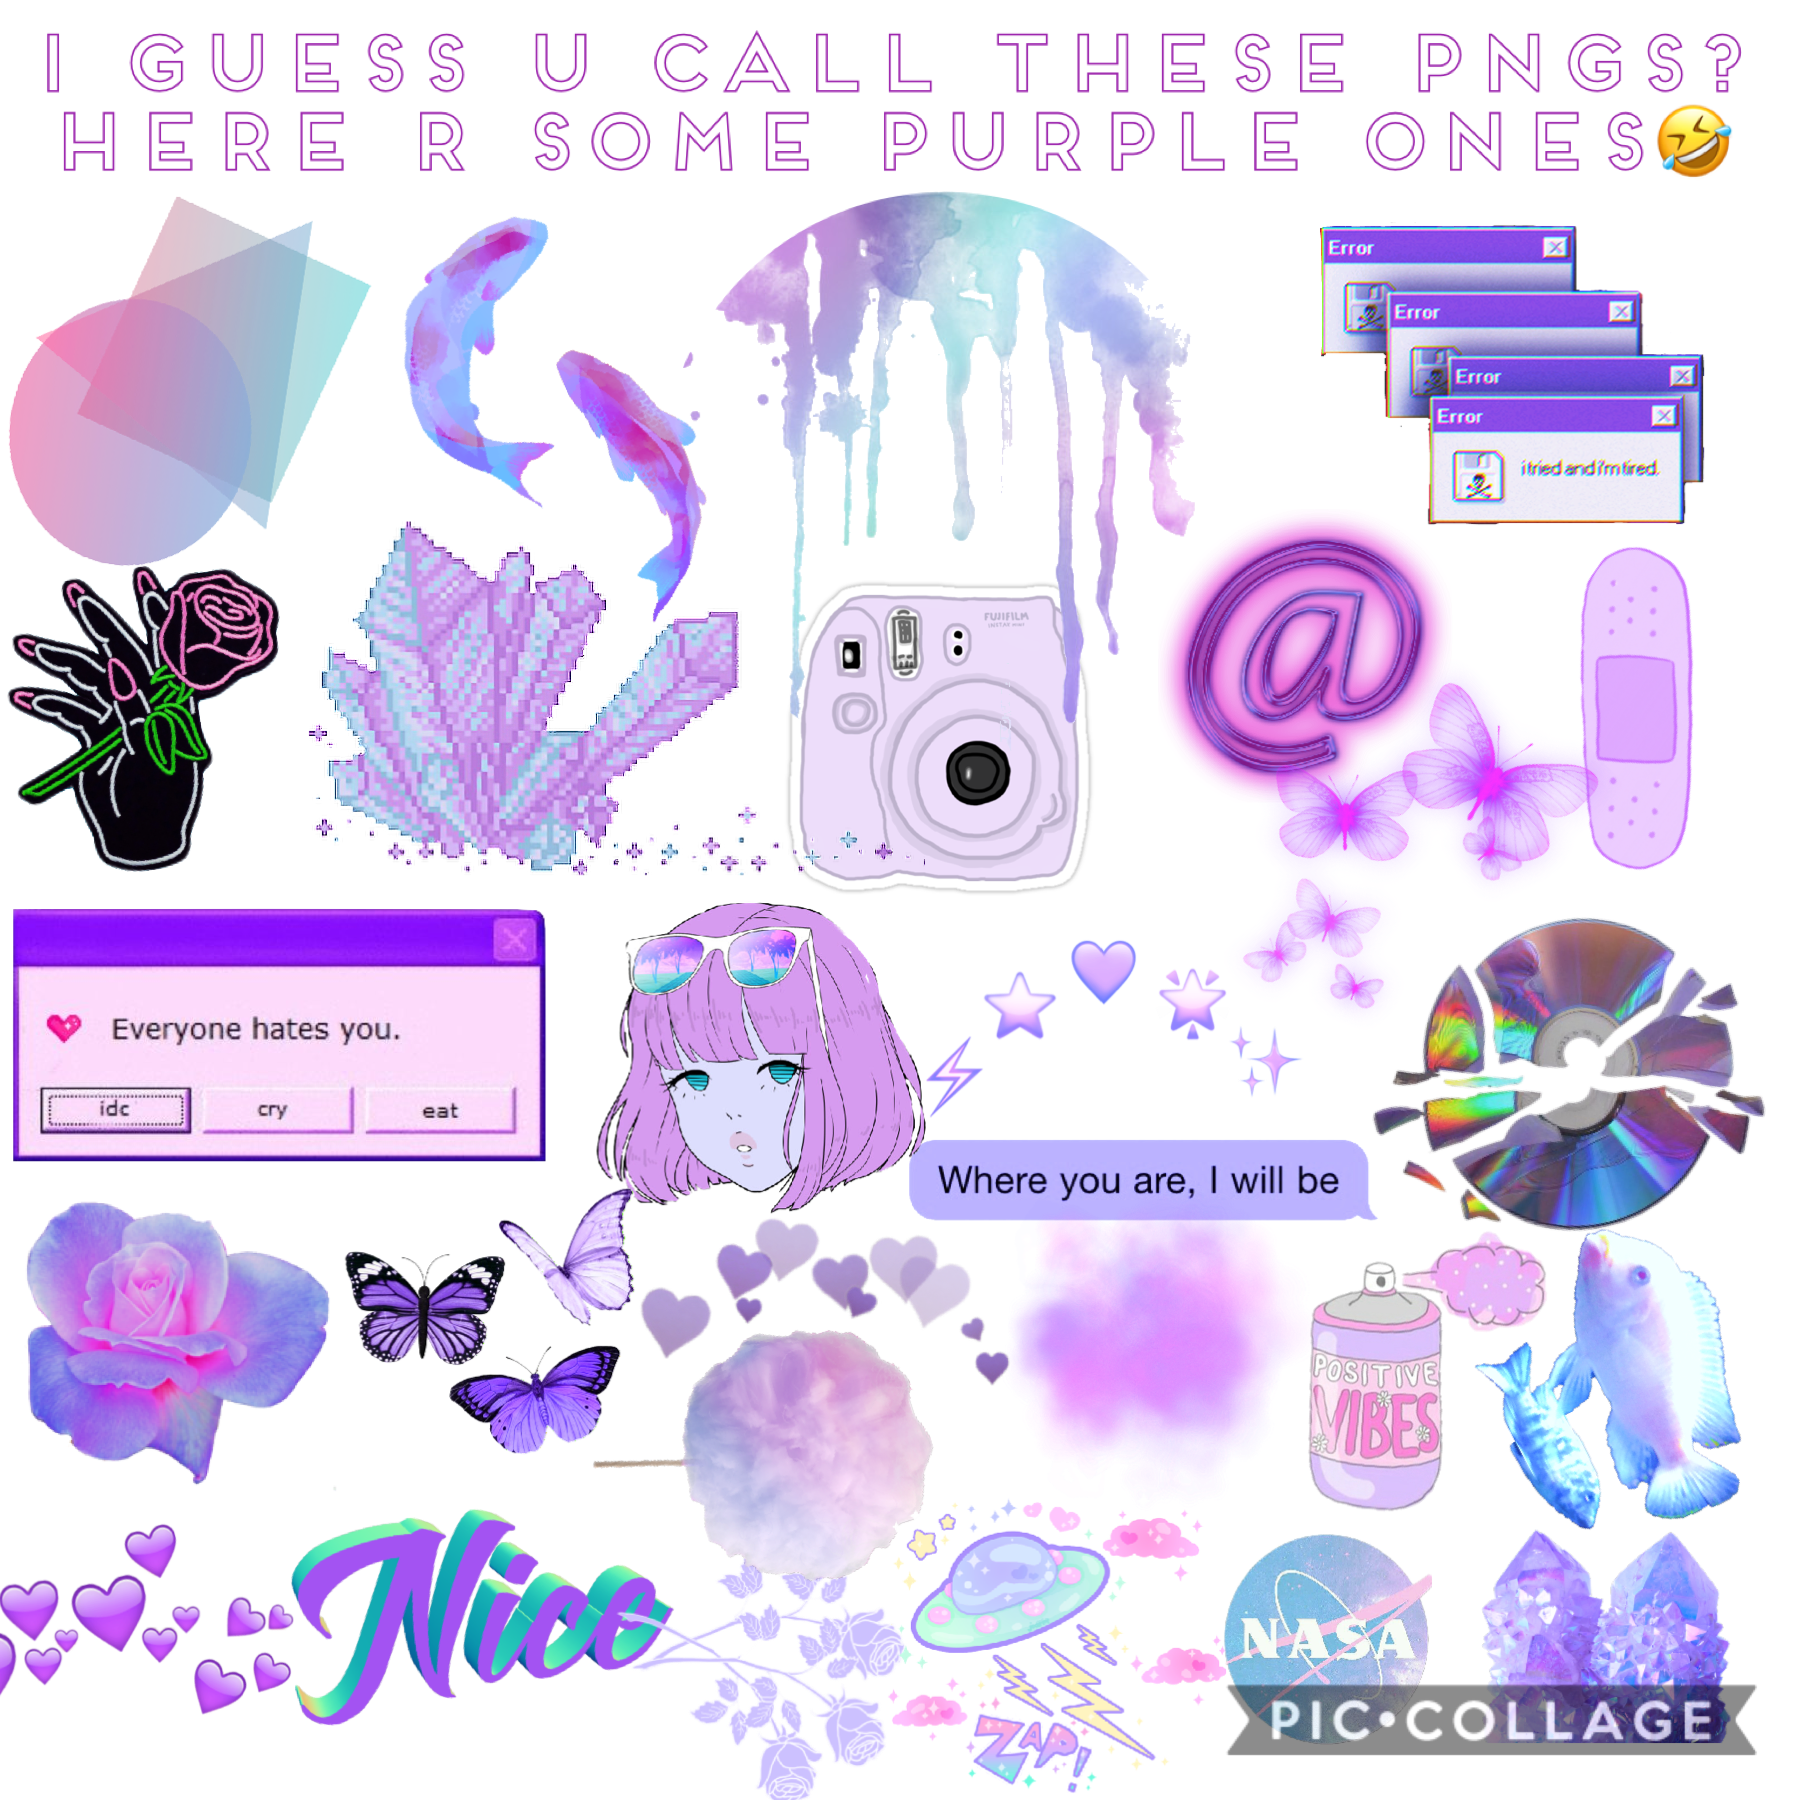 Tap
Ur welcome
💜 this ACTUALLY took a lot of work 💜